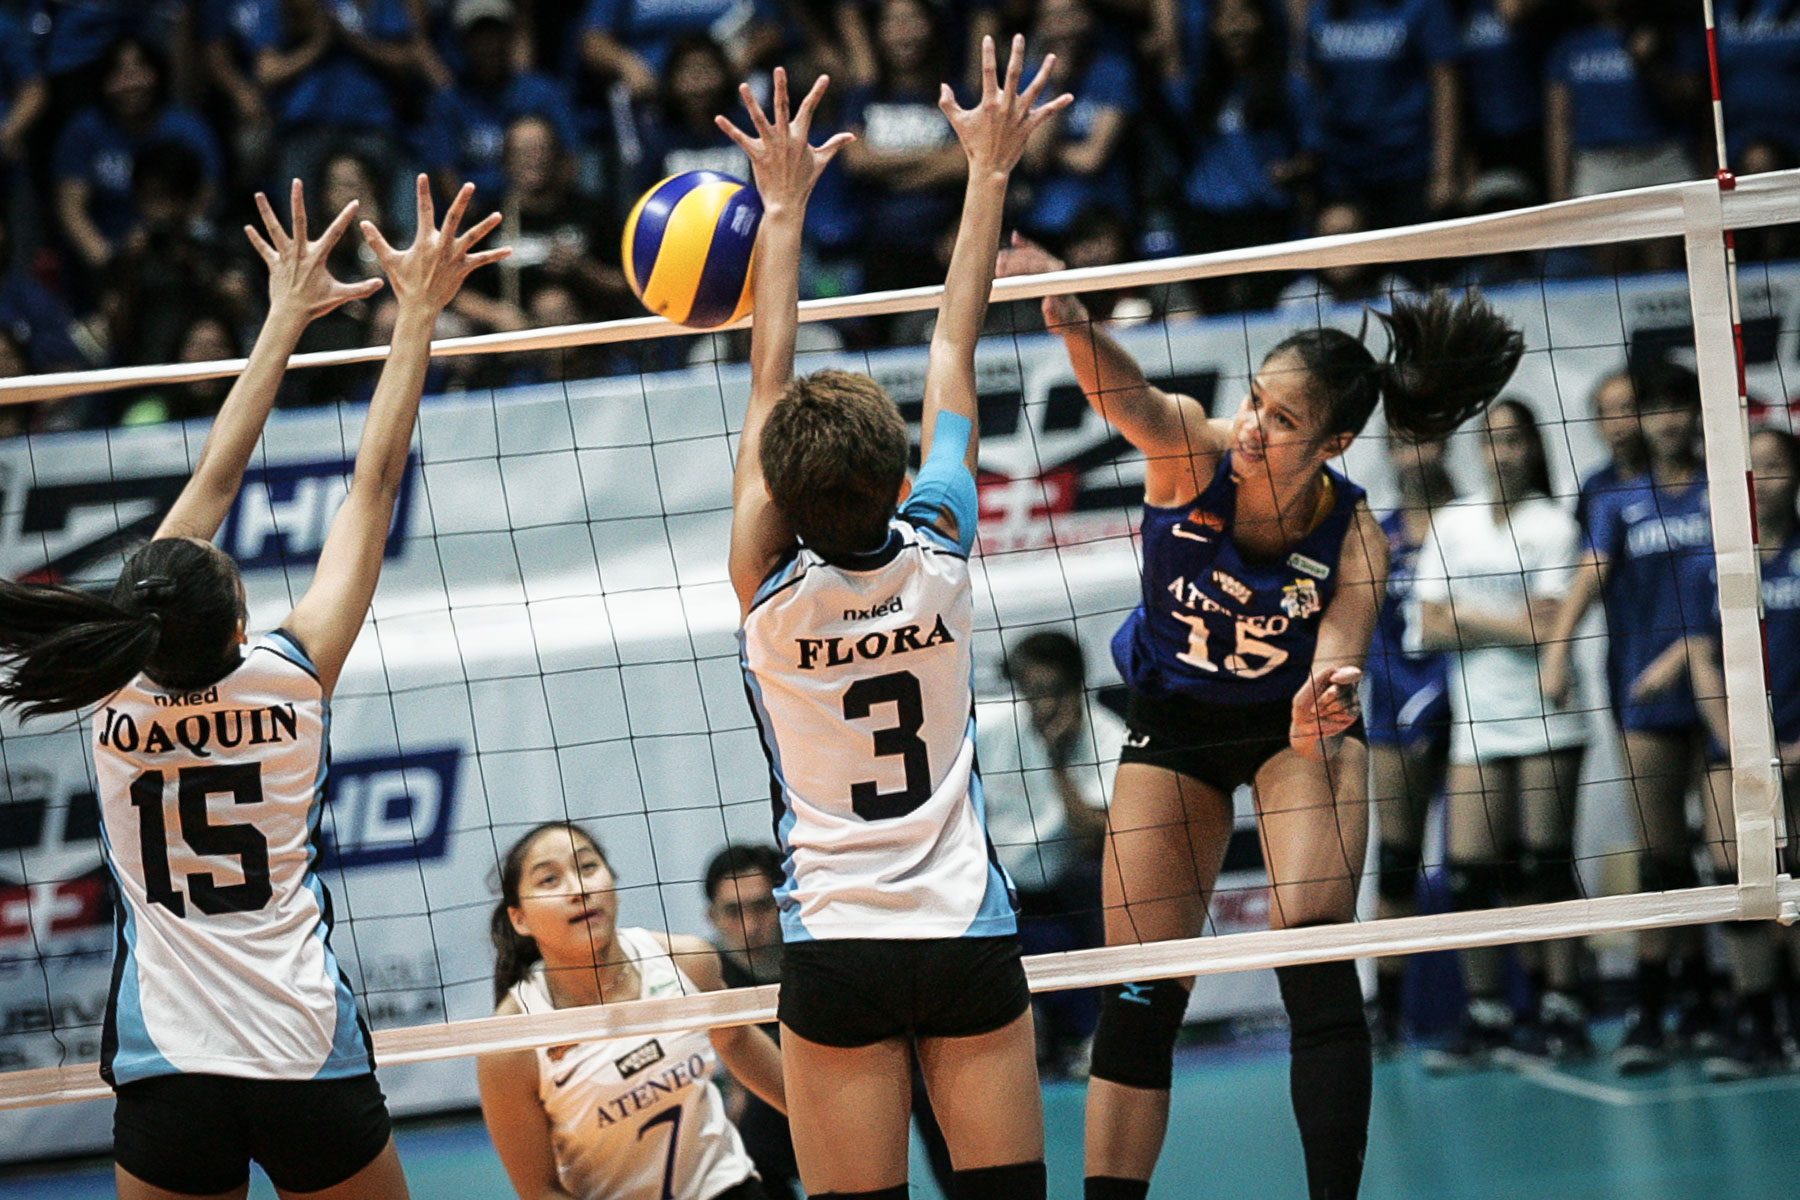 Ateneo Lady Eagles take down Adamson in straight sets